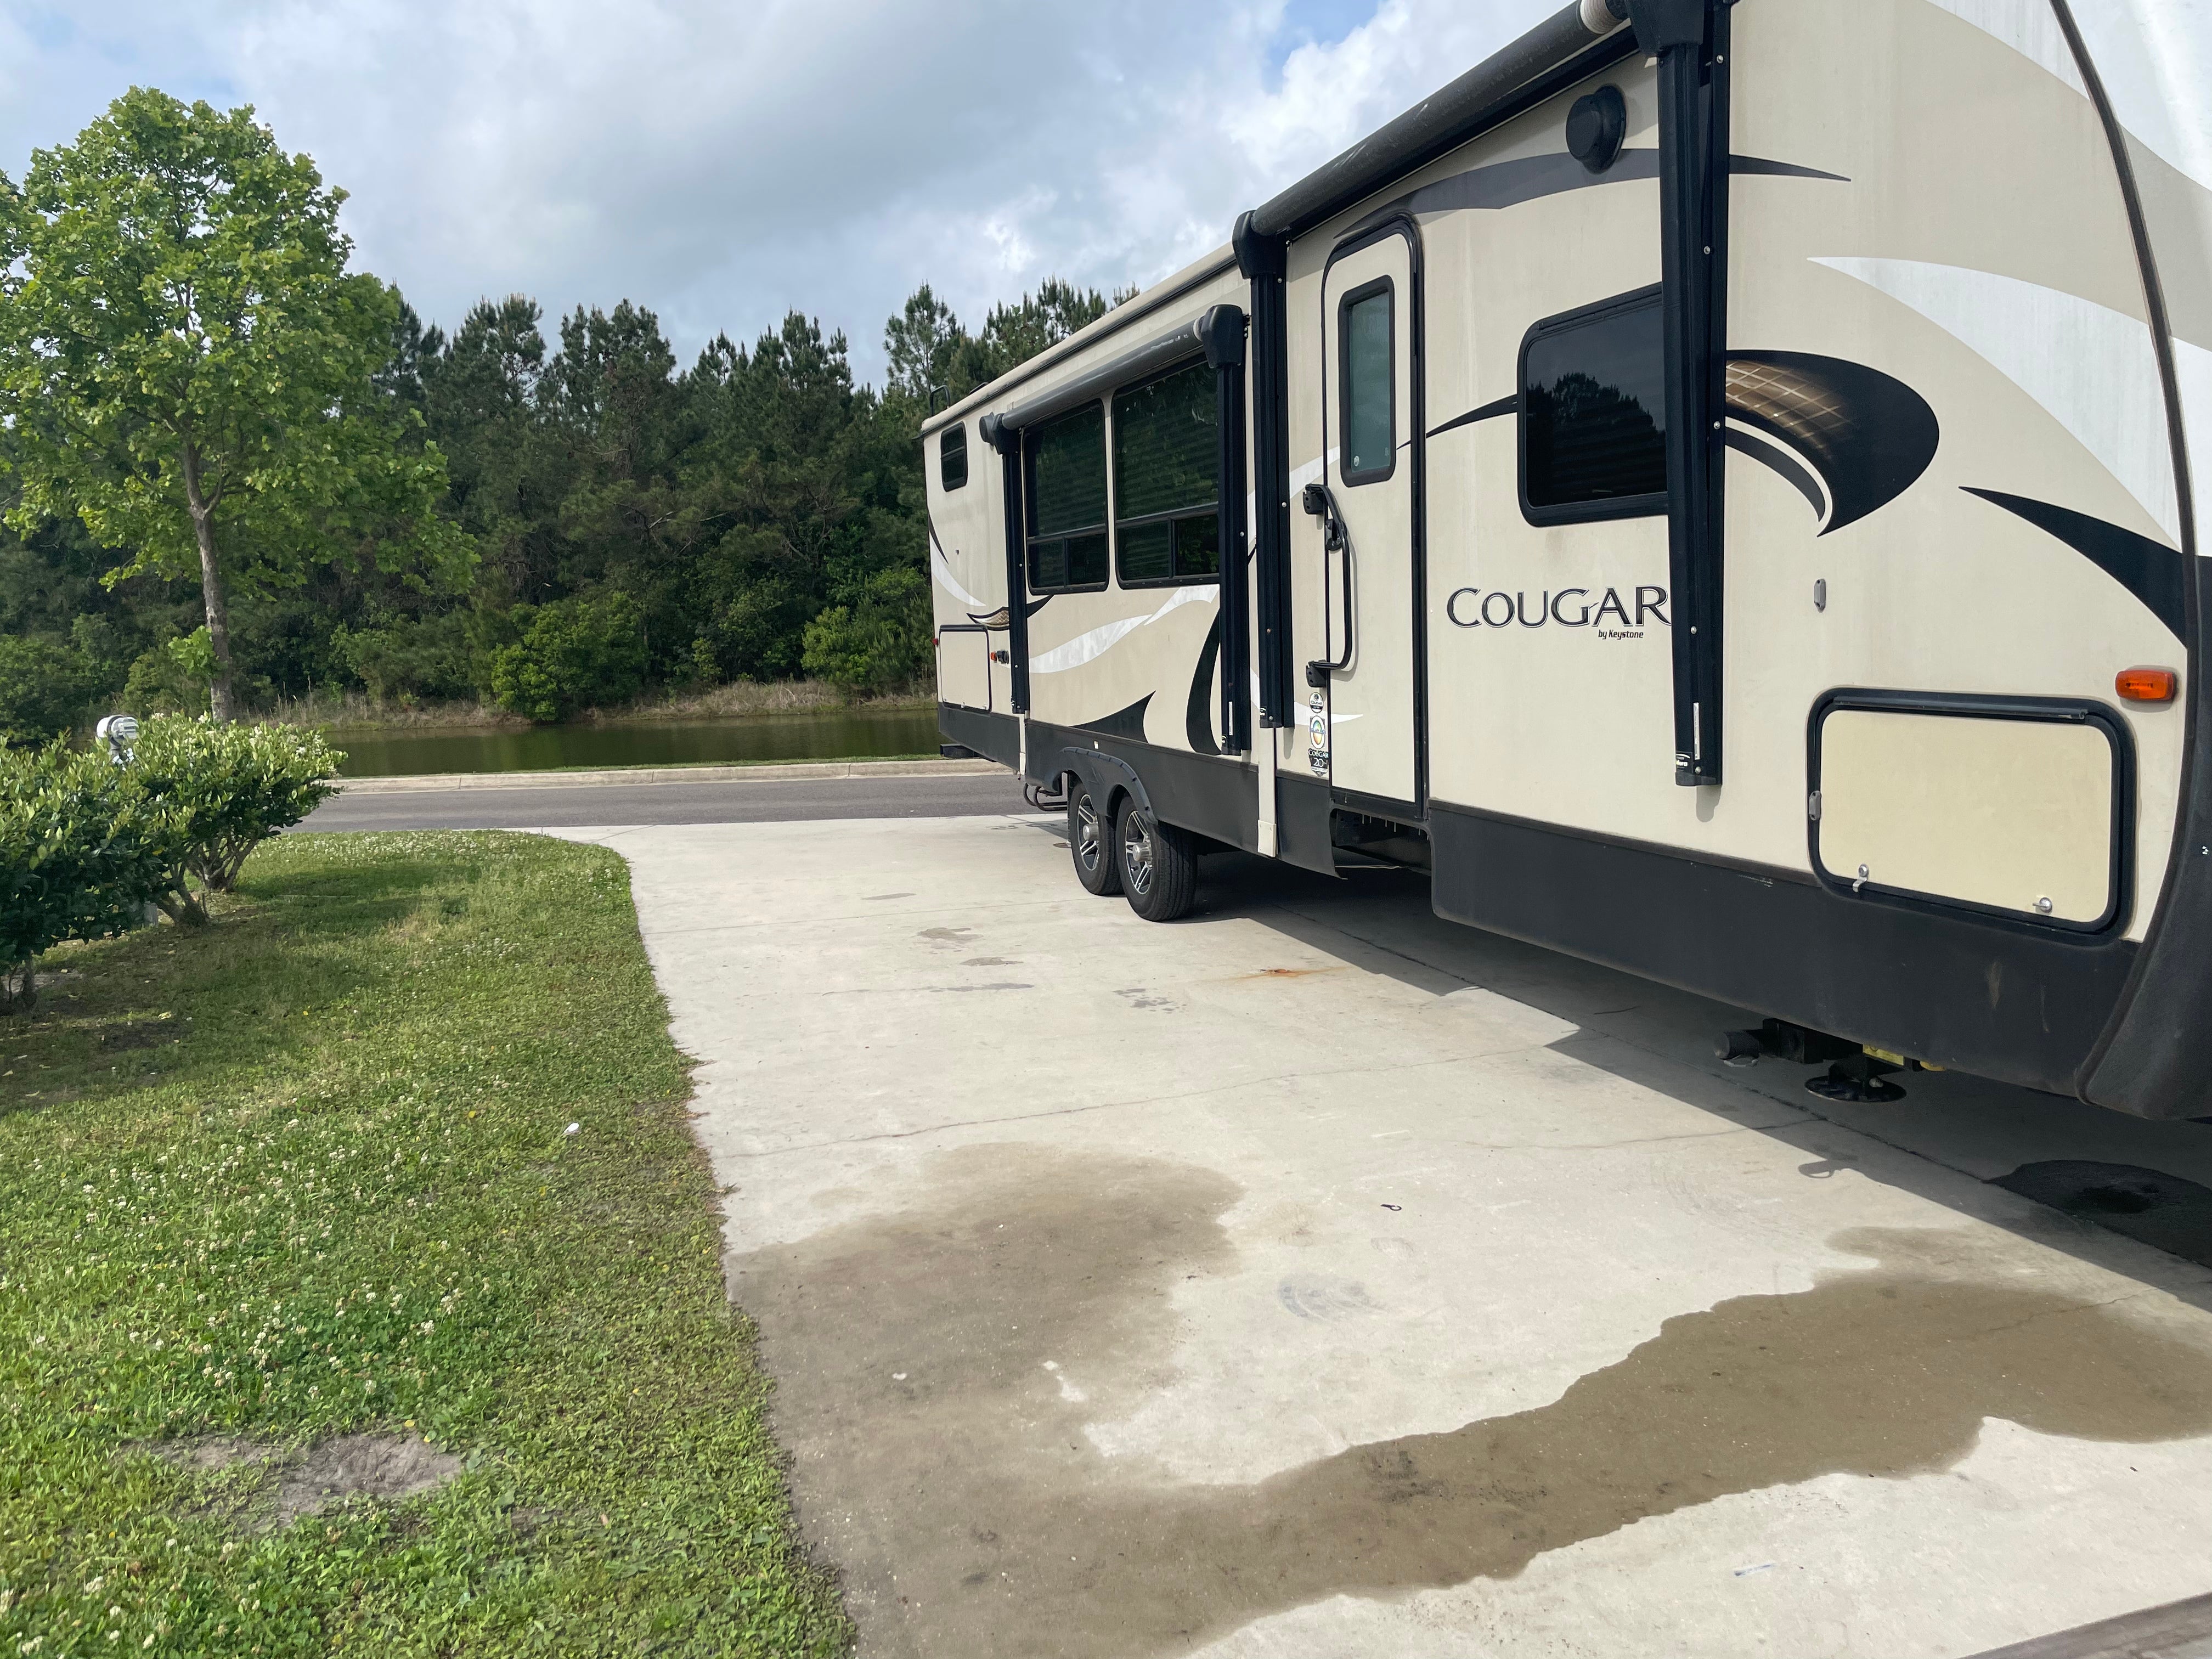 Camper submitted image from Pecan Park RV Resort - 4